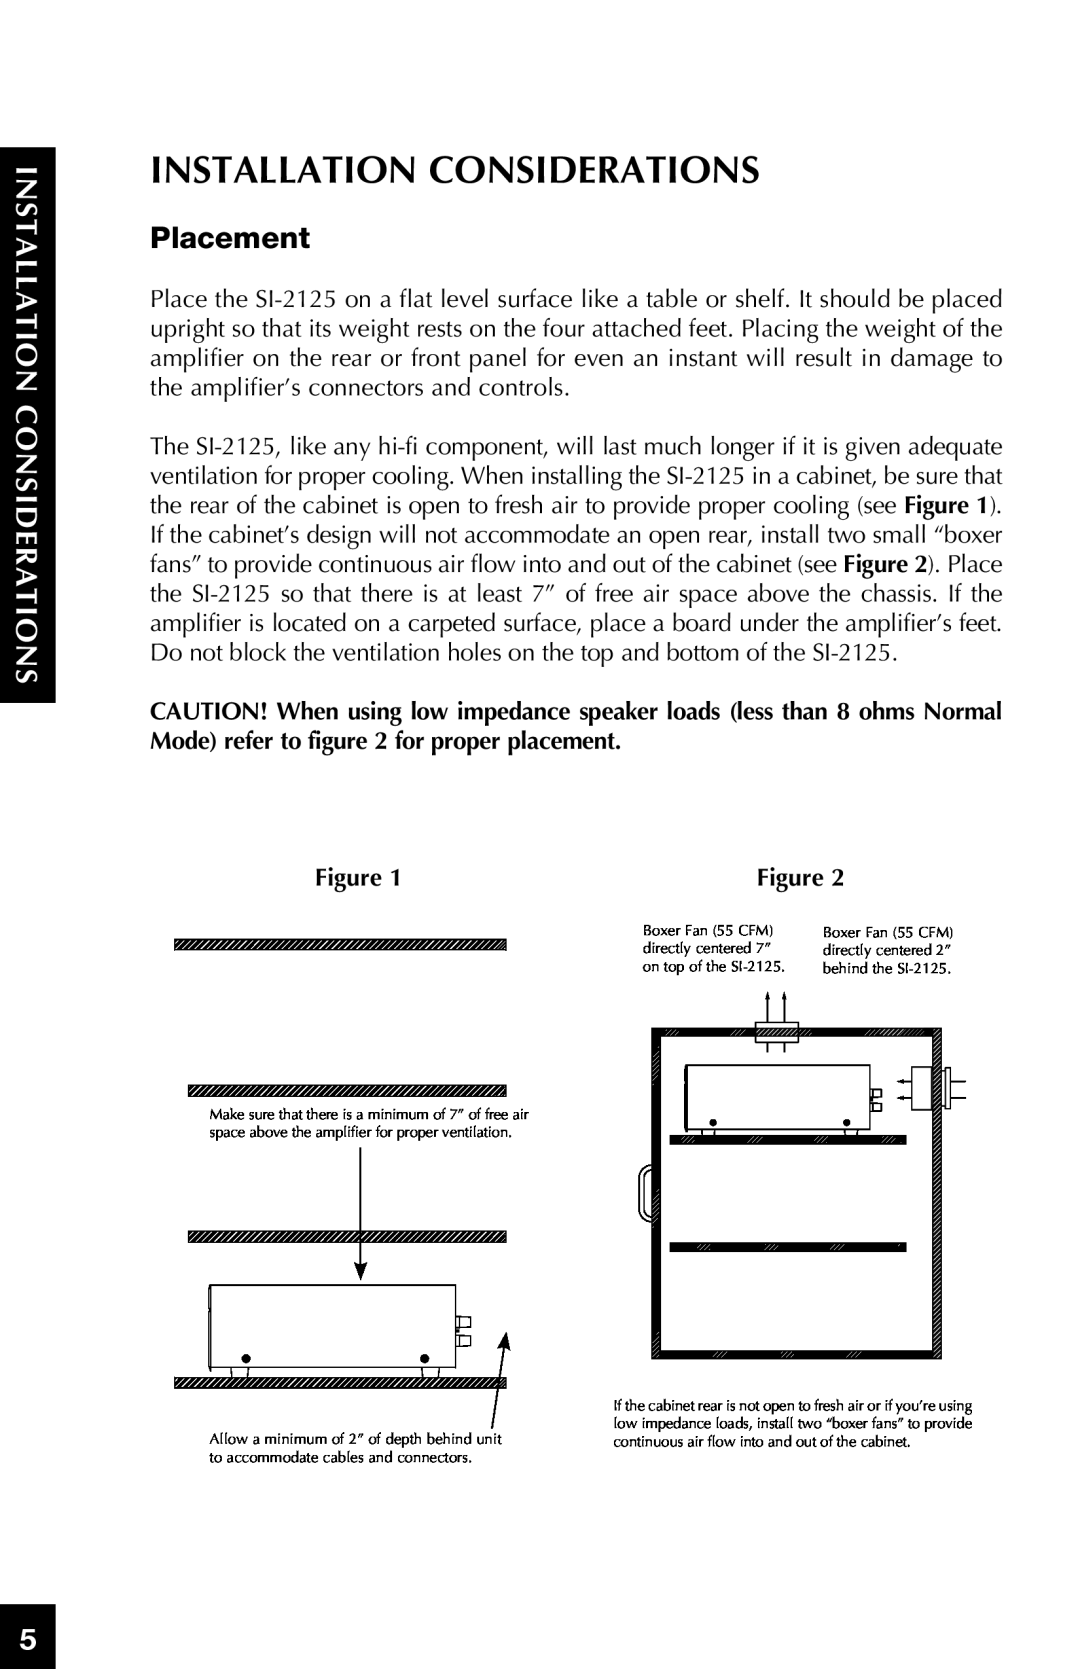 Niles Audio SI-2125 manual Installation Considerations, Placement 